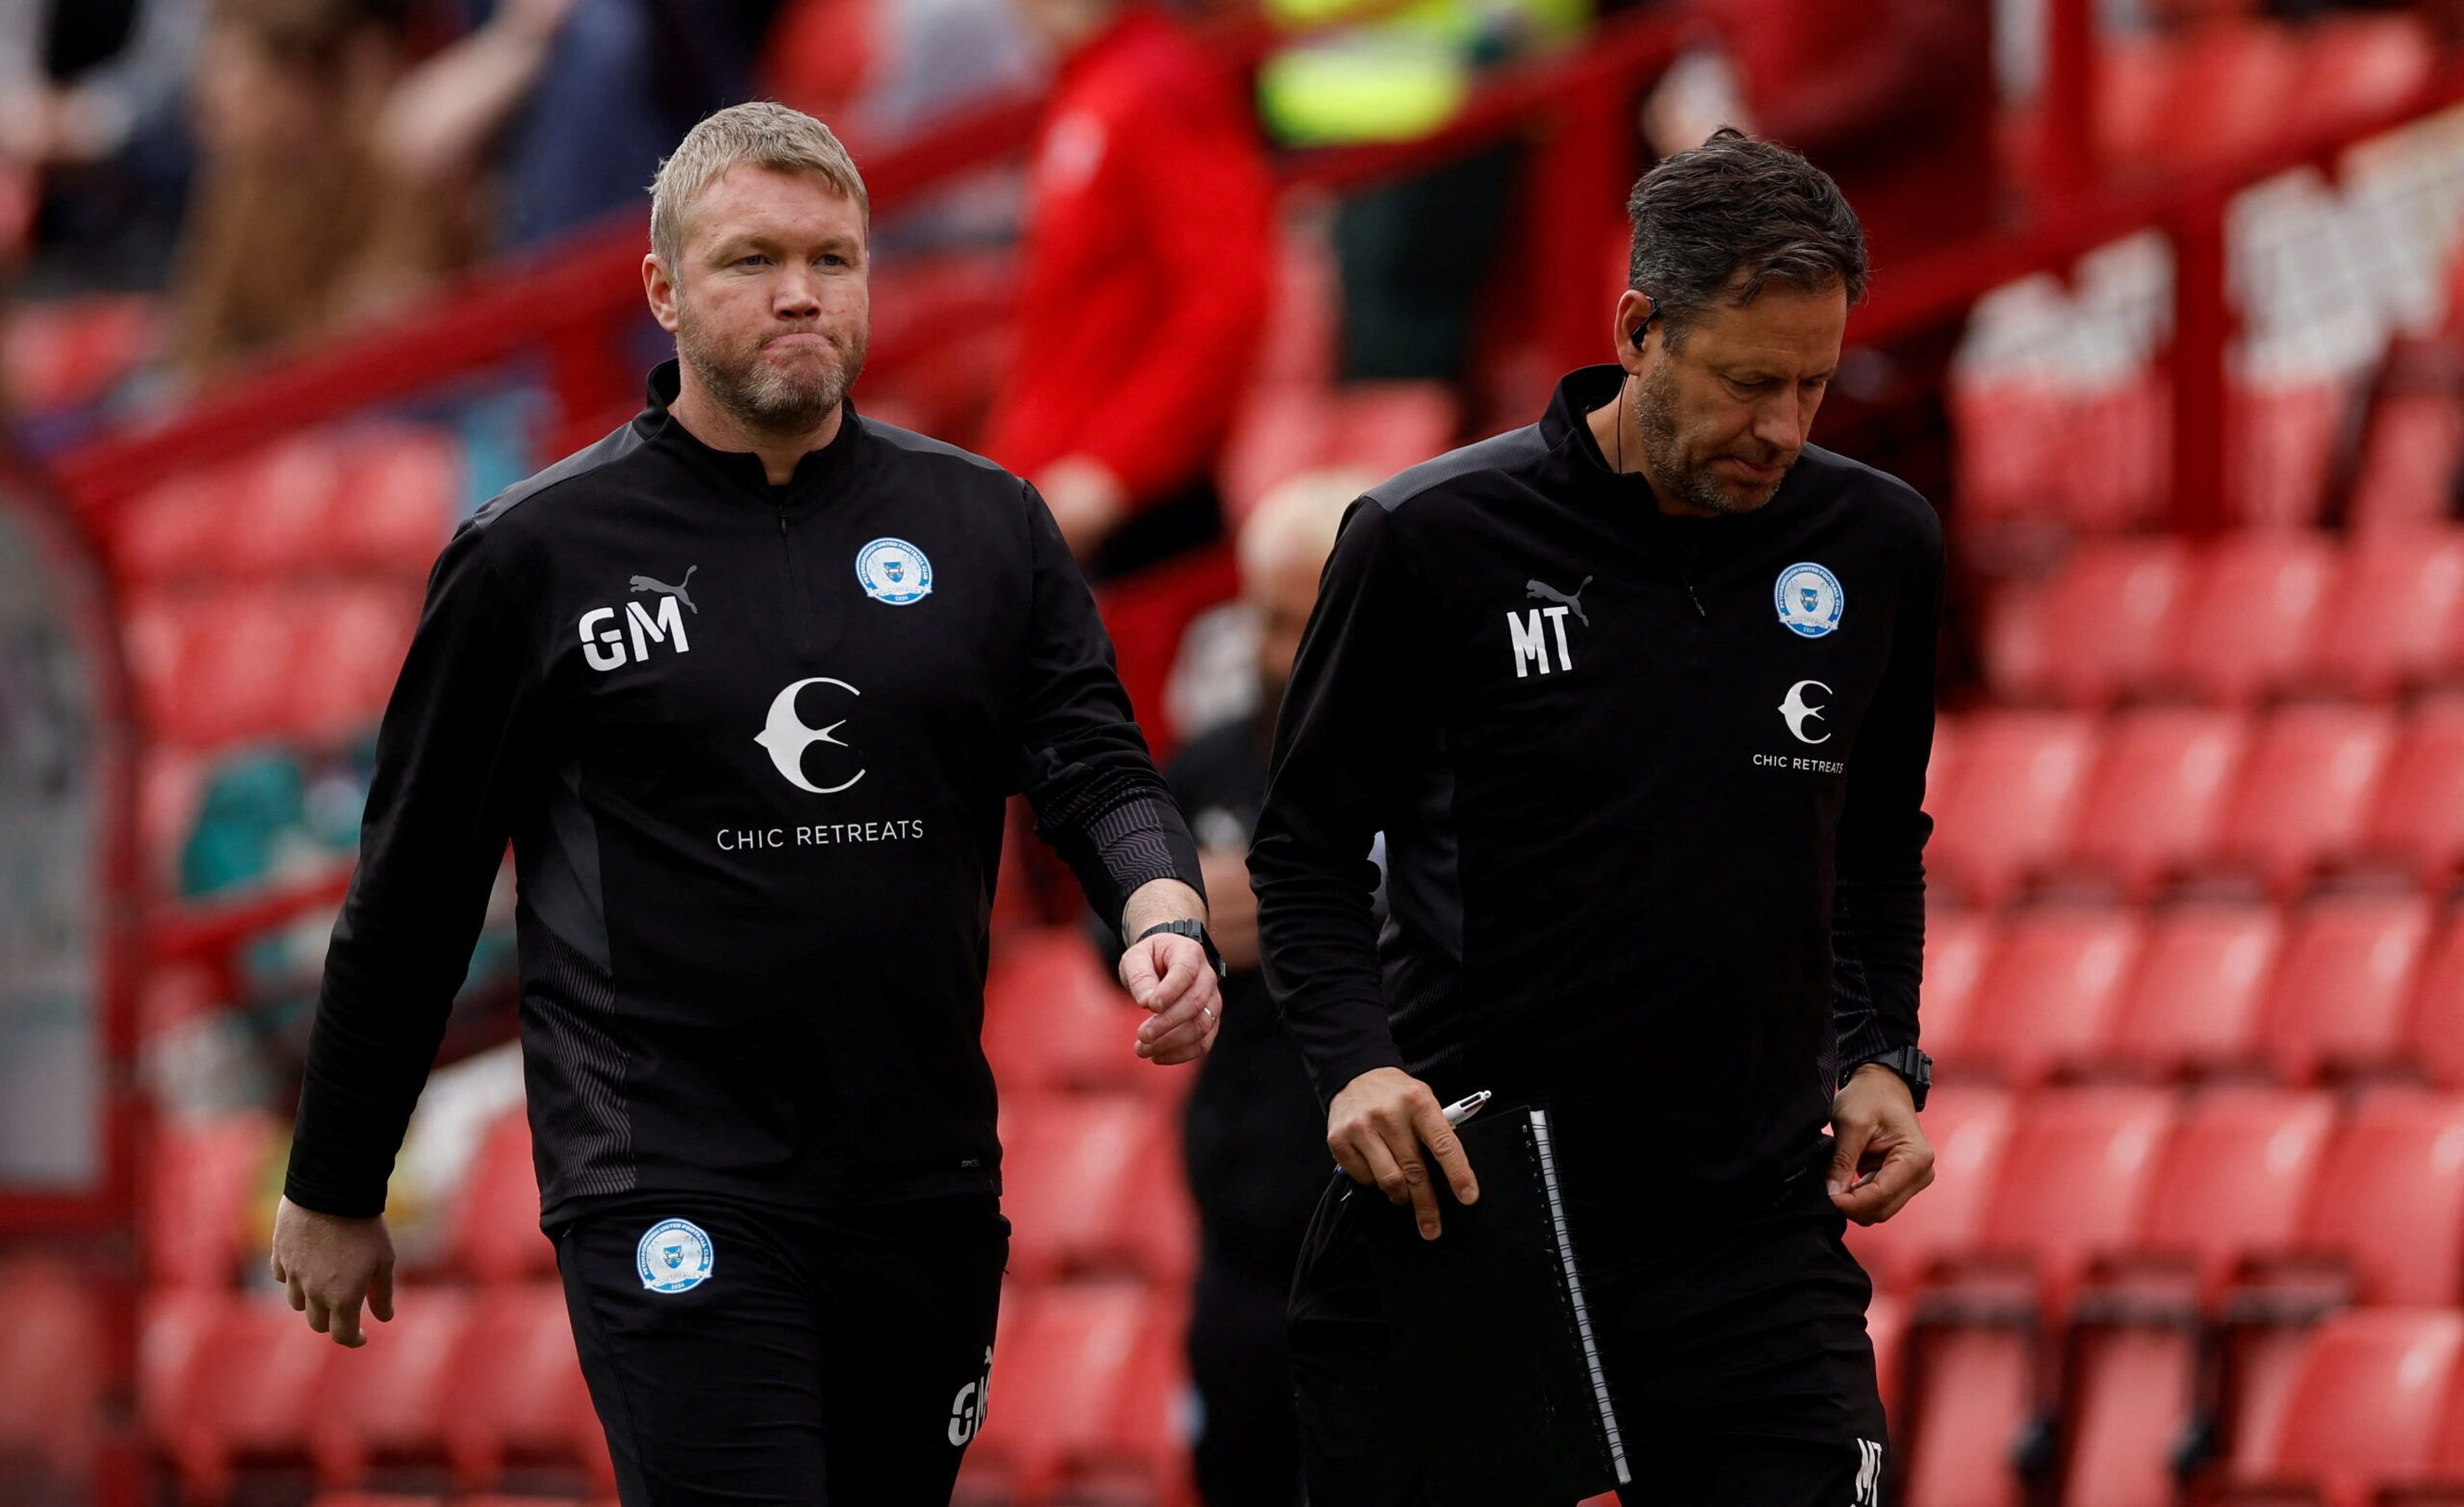 Soccer Football - Championship - Barnsley v Peterborough United - Oakwell, Barnsley, Britain - April 18, 2022 Peterborough United manager Grant McCann  Action Images/Jason Cairnduff  EDITORIAL USE ONLY. No use with unauthorized audio, video, data, fixture lists, club/league logos or 